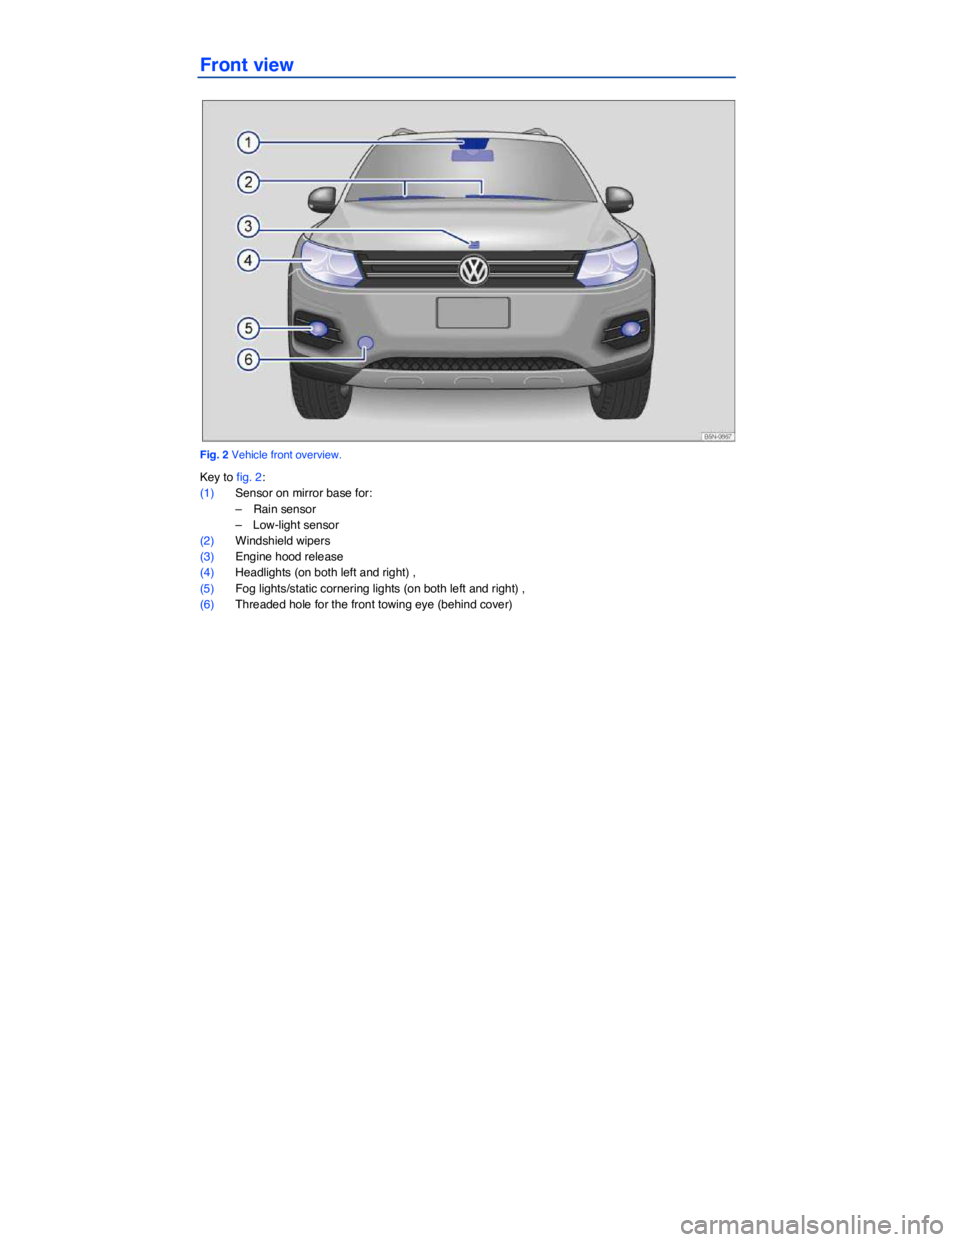 VOLKSWAGEN TIGUAN 2012  Owners Manual  
Front view 
 
Fig. 2 Vehicle front overview. 
Key to fig. 2: 
(1) Sensor on mirror base for: 
–  Rain sensor  
–  Low-light sensor  
(2) Windshield wipers  
(3) Engine hood release  
(4) Headlig